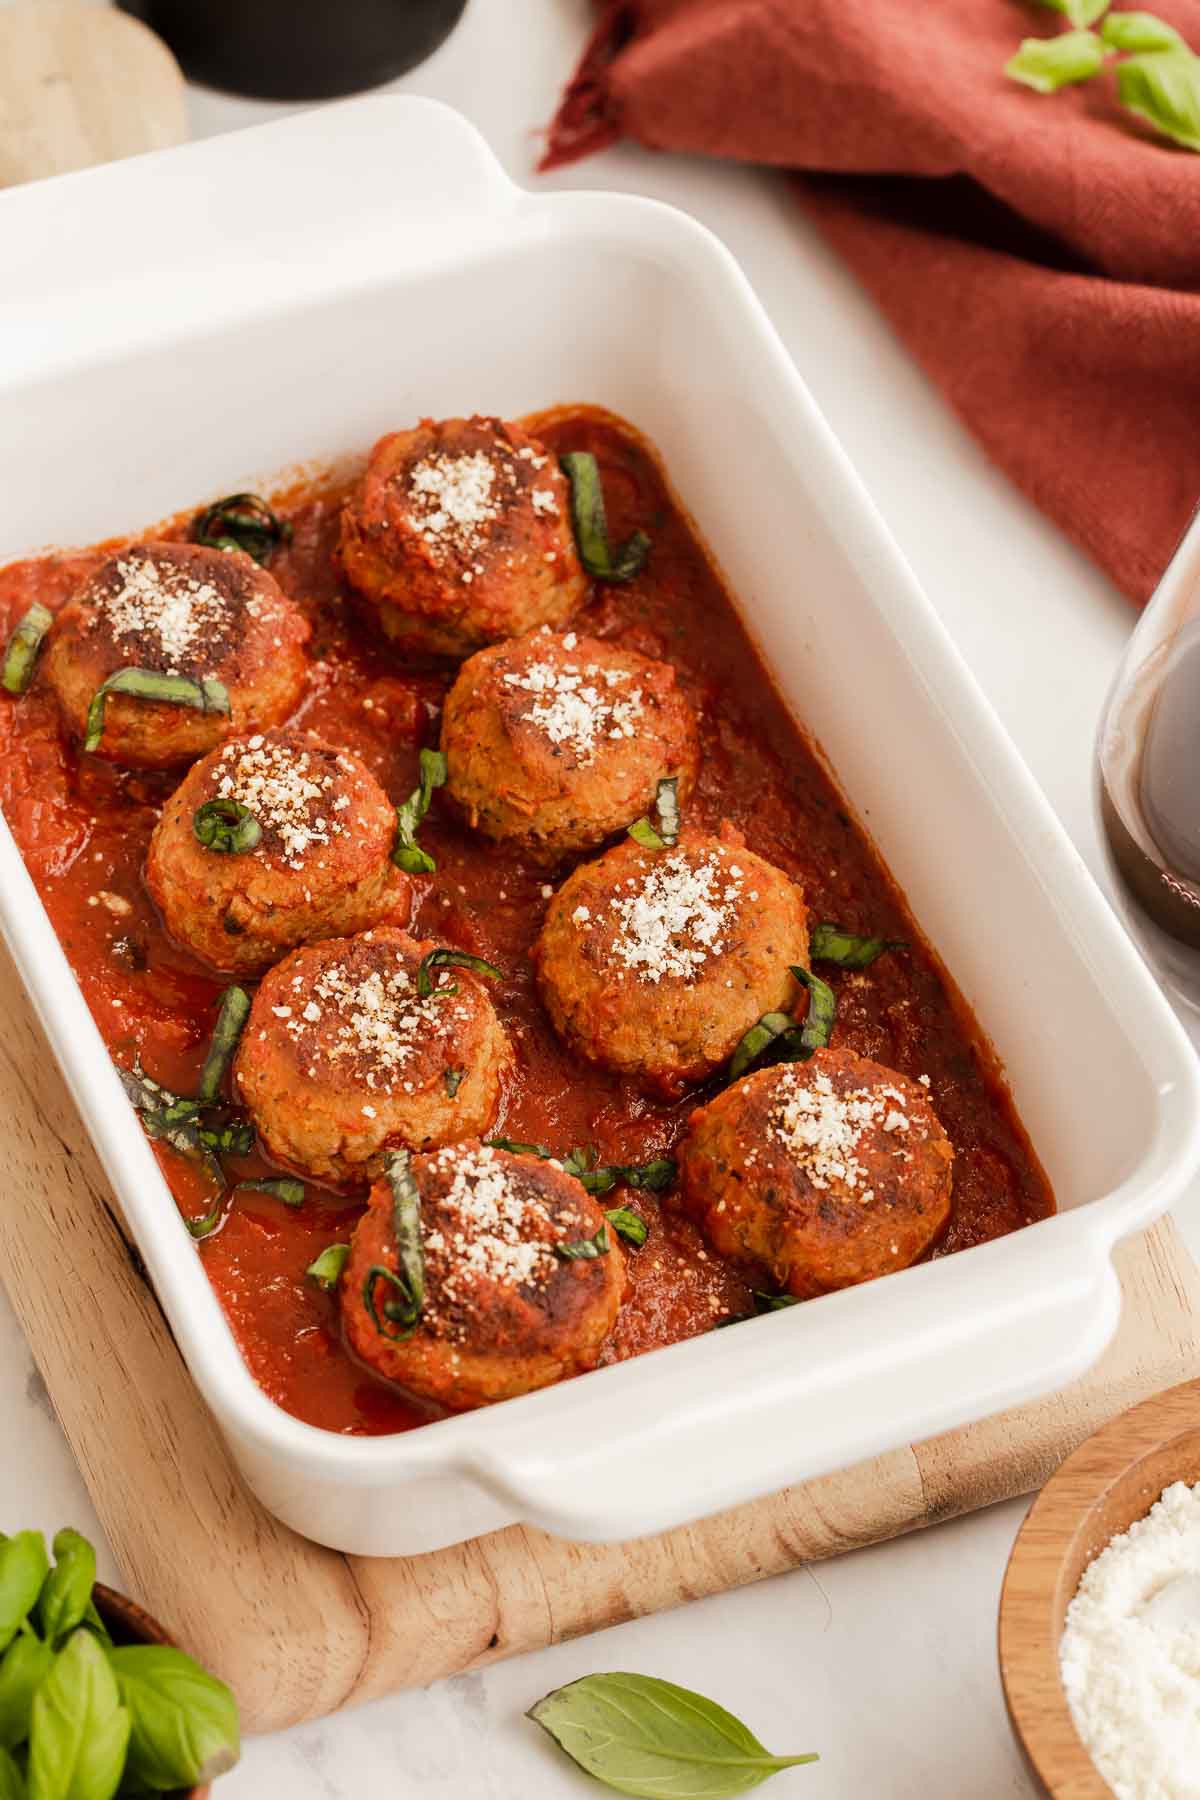 Fried lentil meatballs in a casserole dish with tomato sauce.